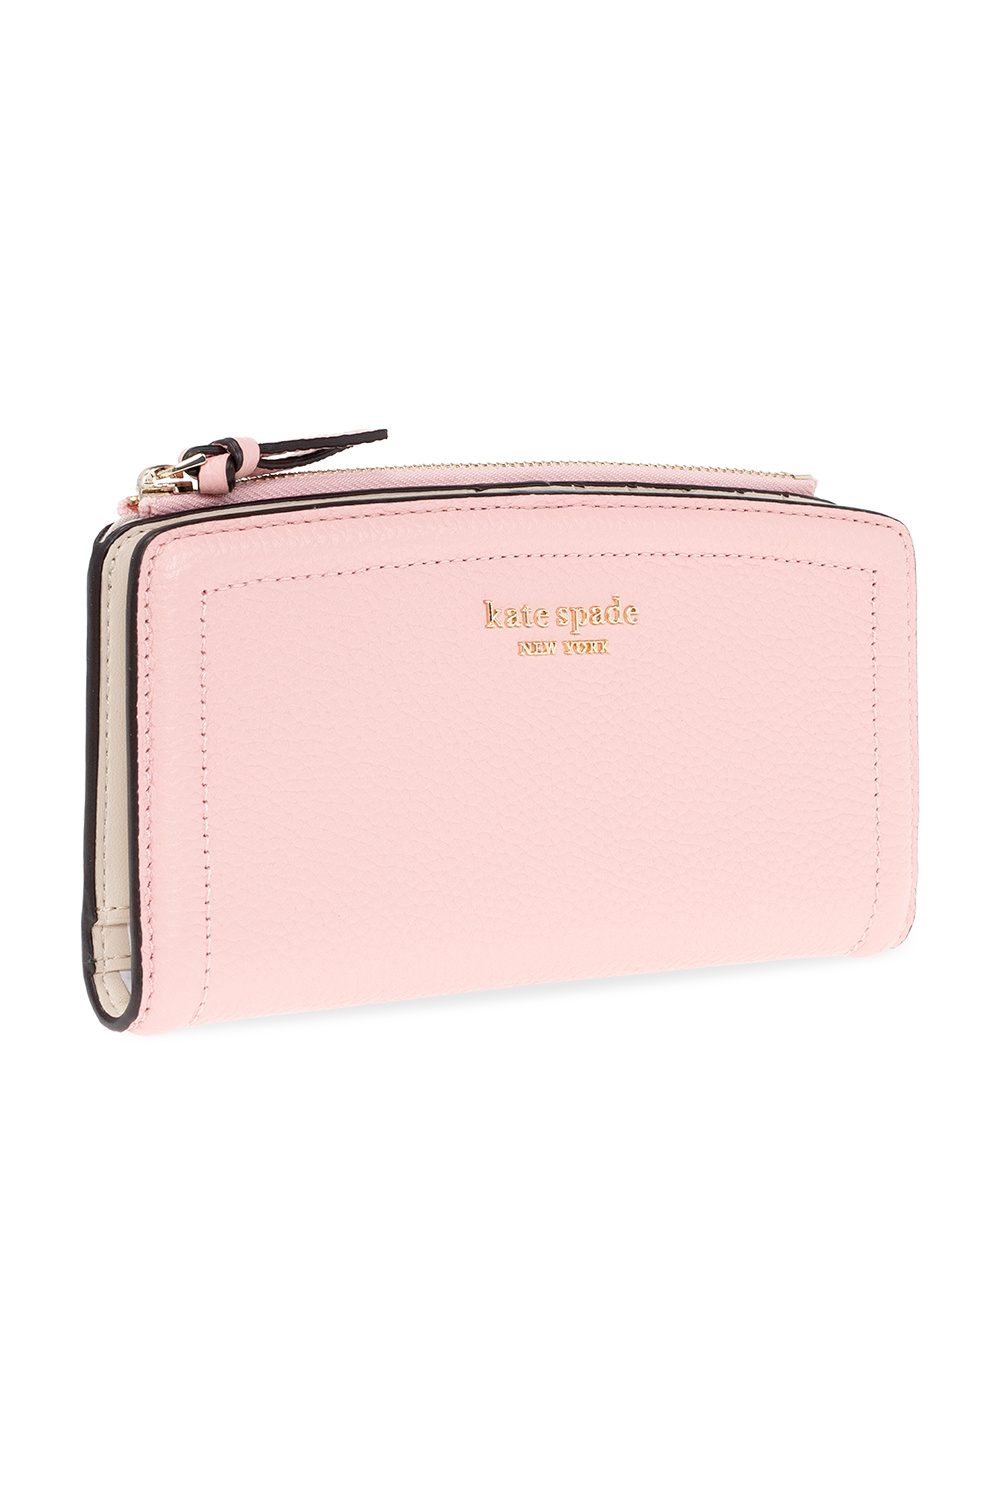 kate spade, Bags, Nwt Kate Spade Connie Small Trifold Wallet Pink